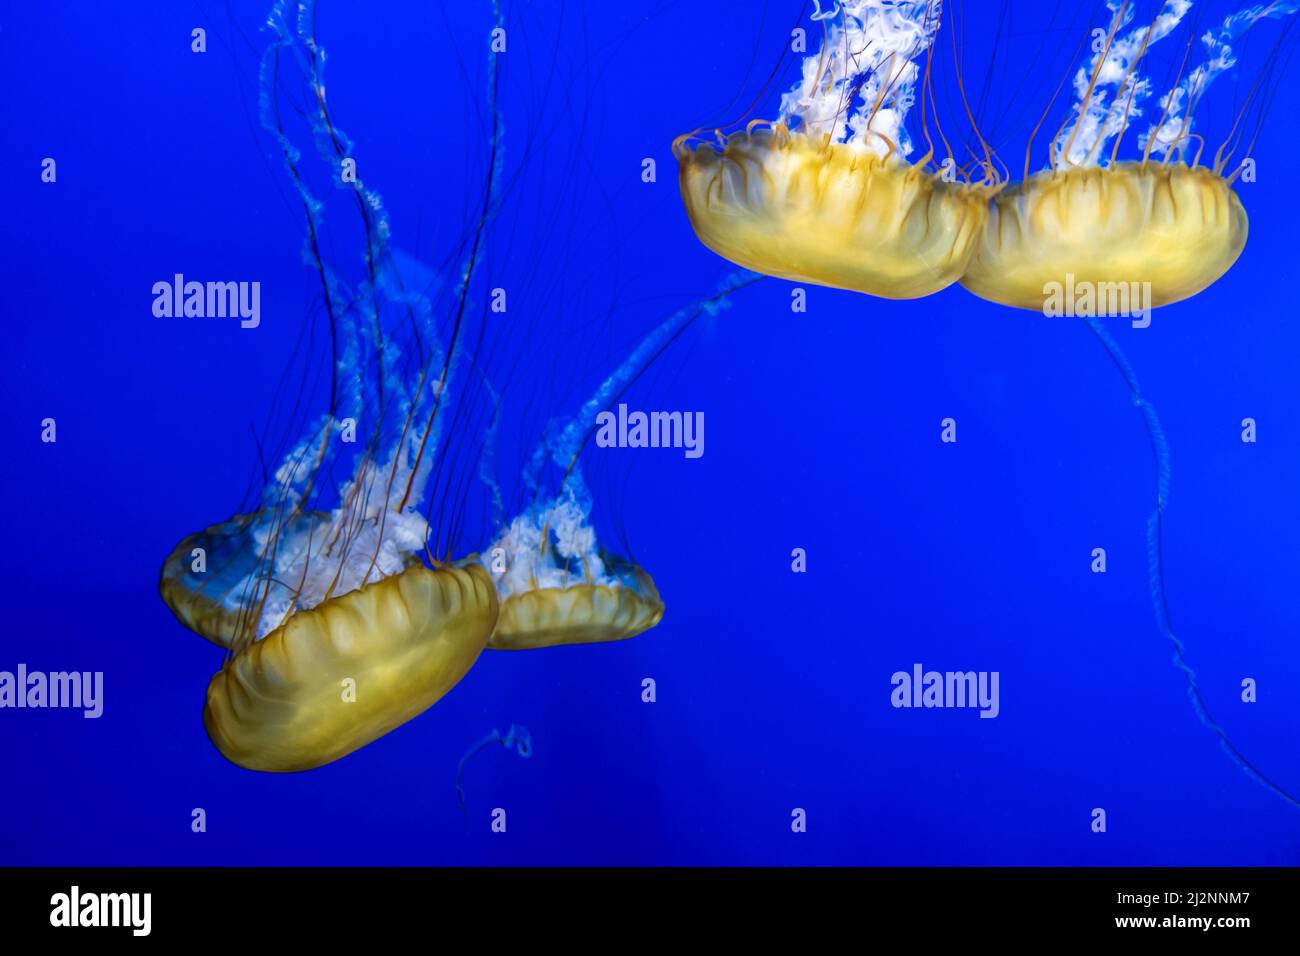 Gorgeous view of a group of pacific sea nettles swimming around inside a bright blue aquarium Stock Photo